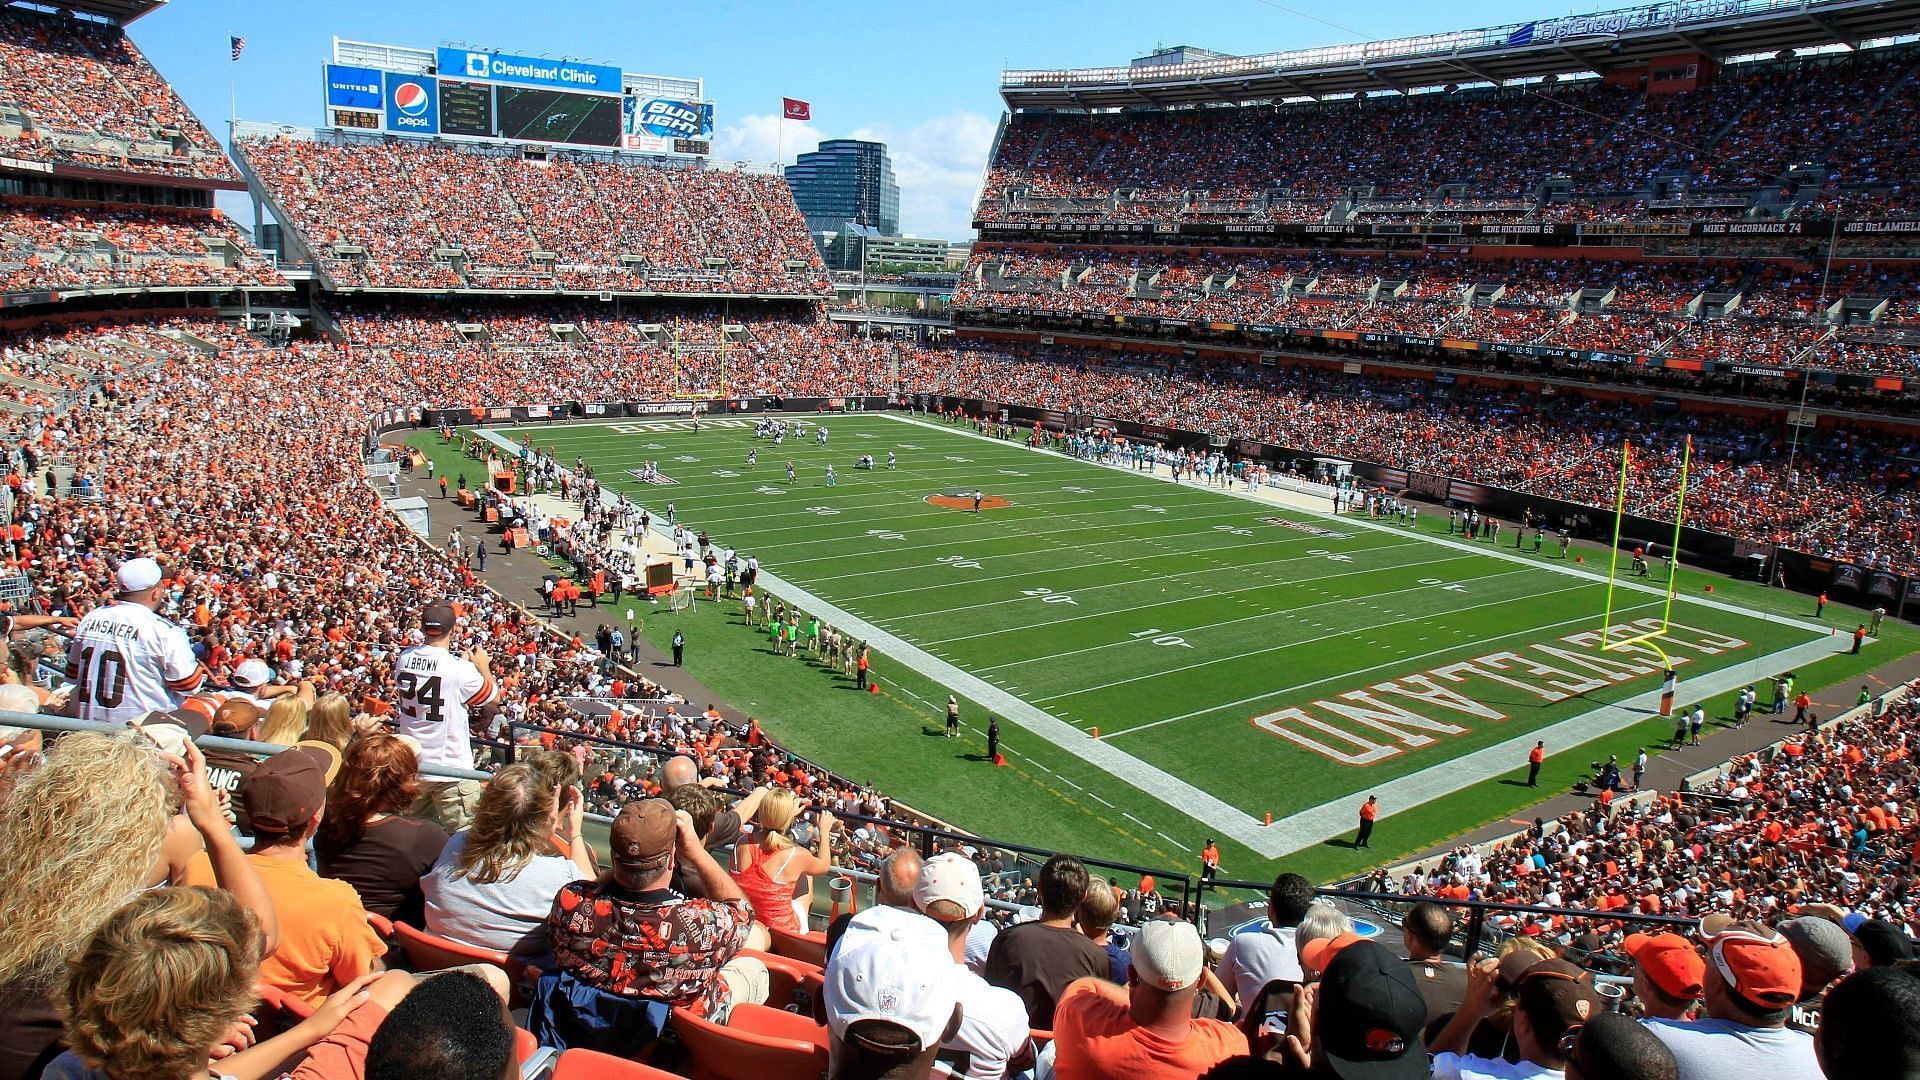 The current home of the Browns - FirstEnergy Stadium. Source: WKYC